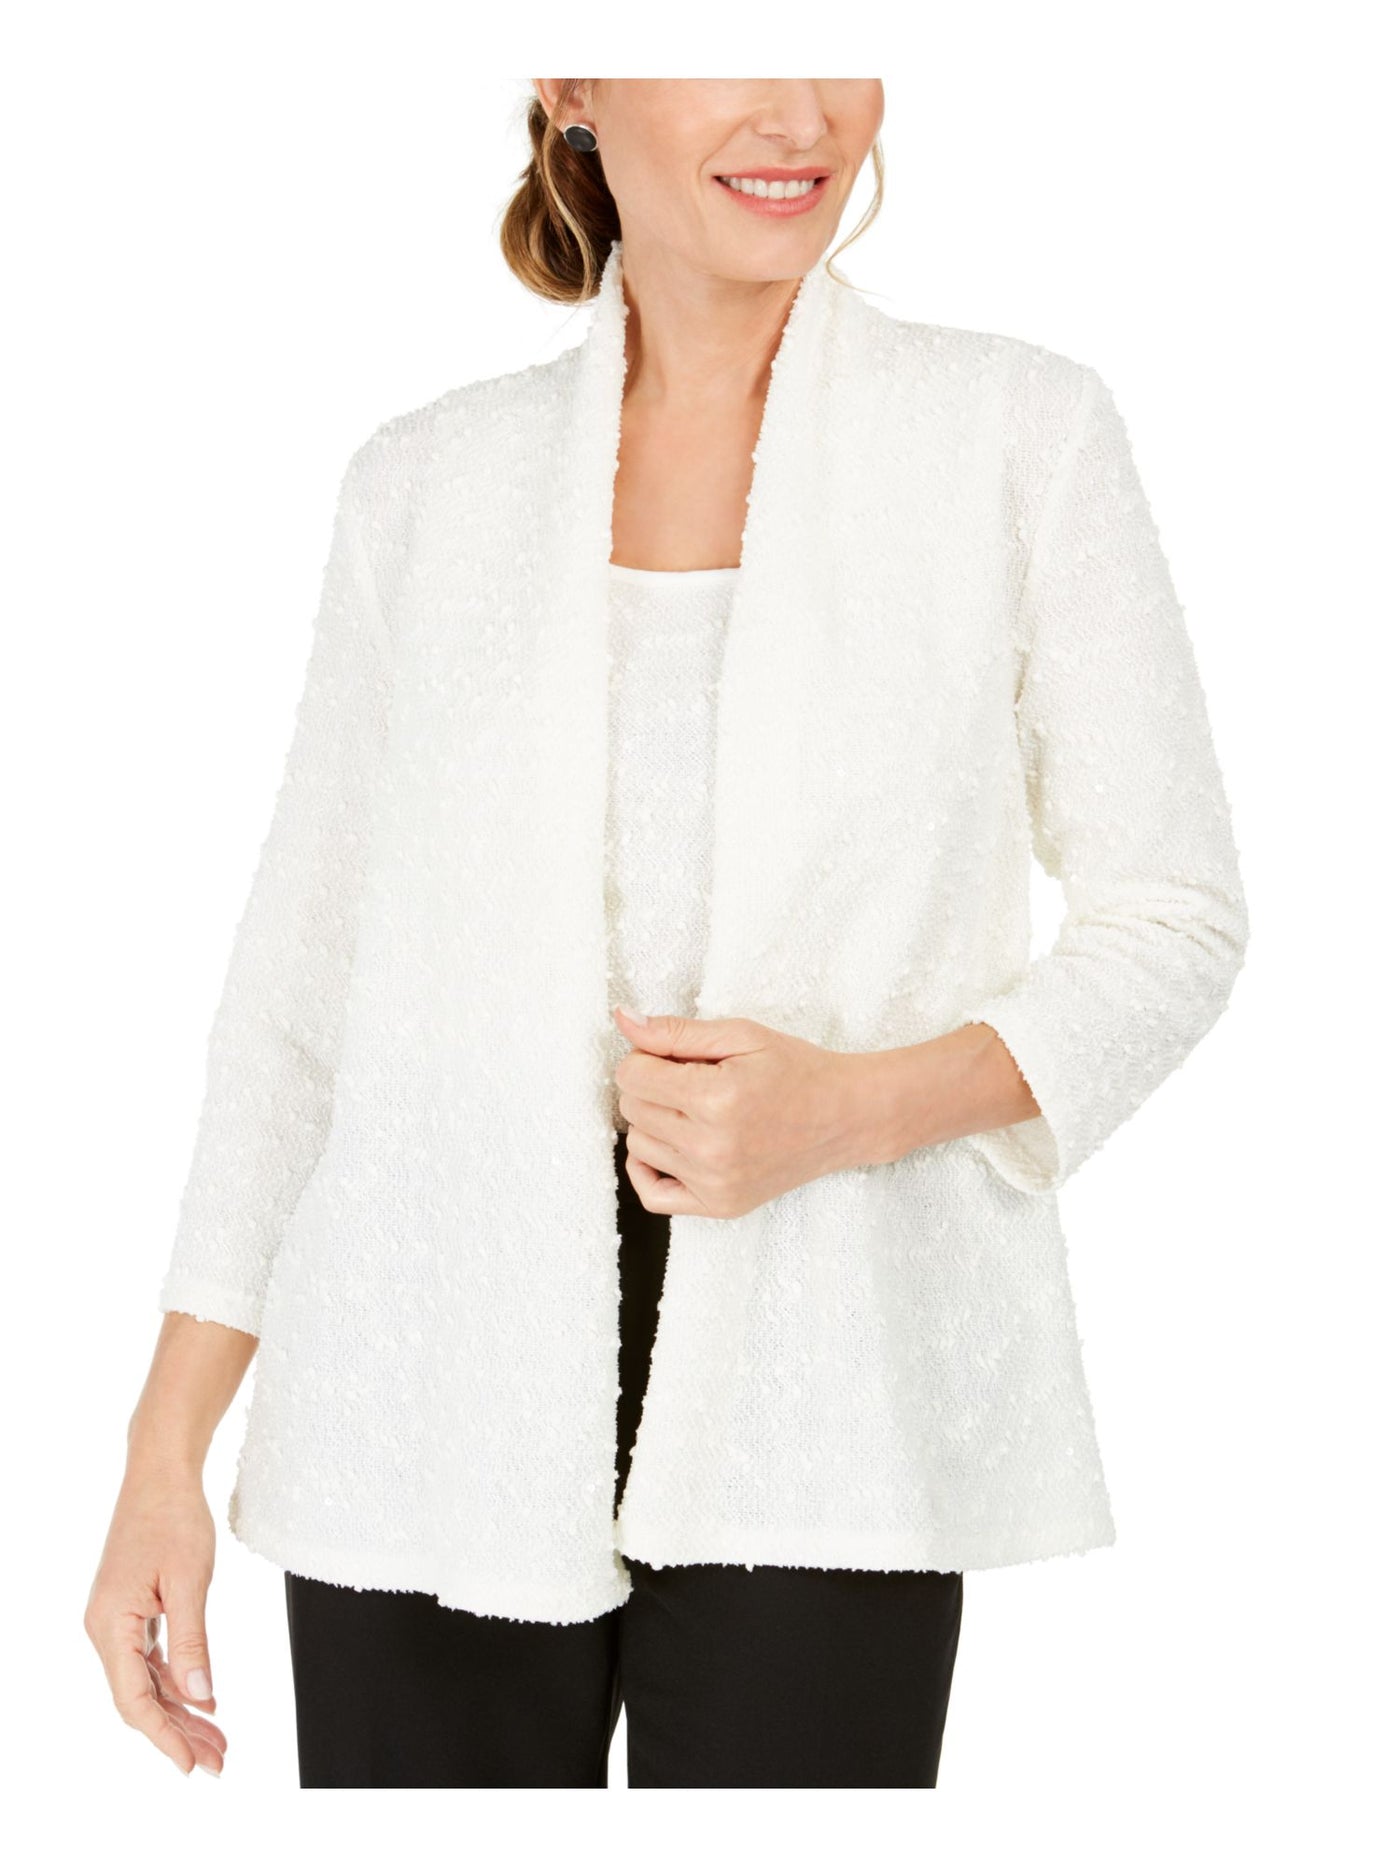 KASPER Womens Ivory Embroidered Textured 3/4 Sleeve Open Cardigan Evening Top Petites PM